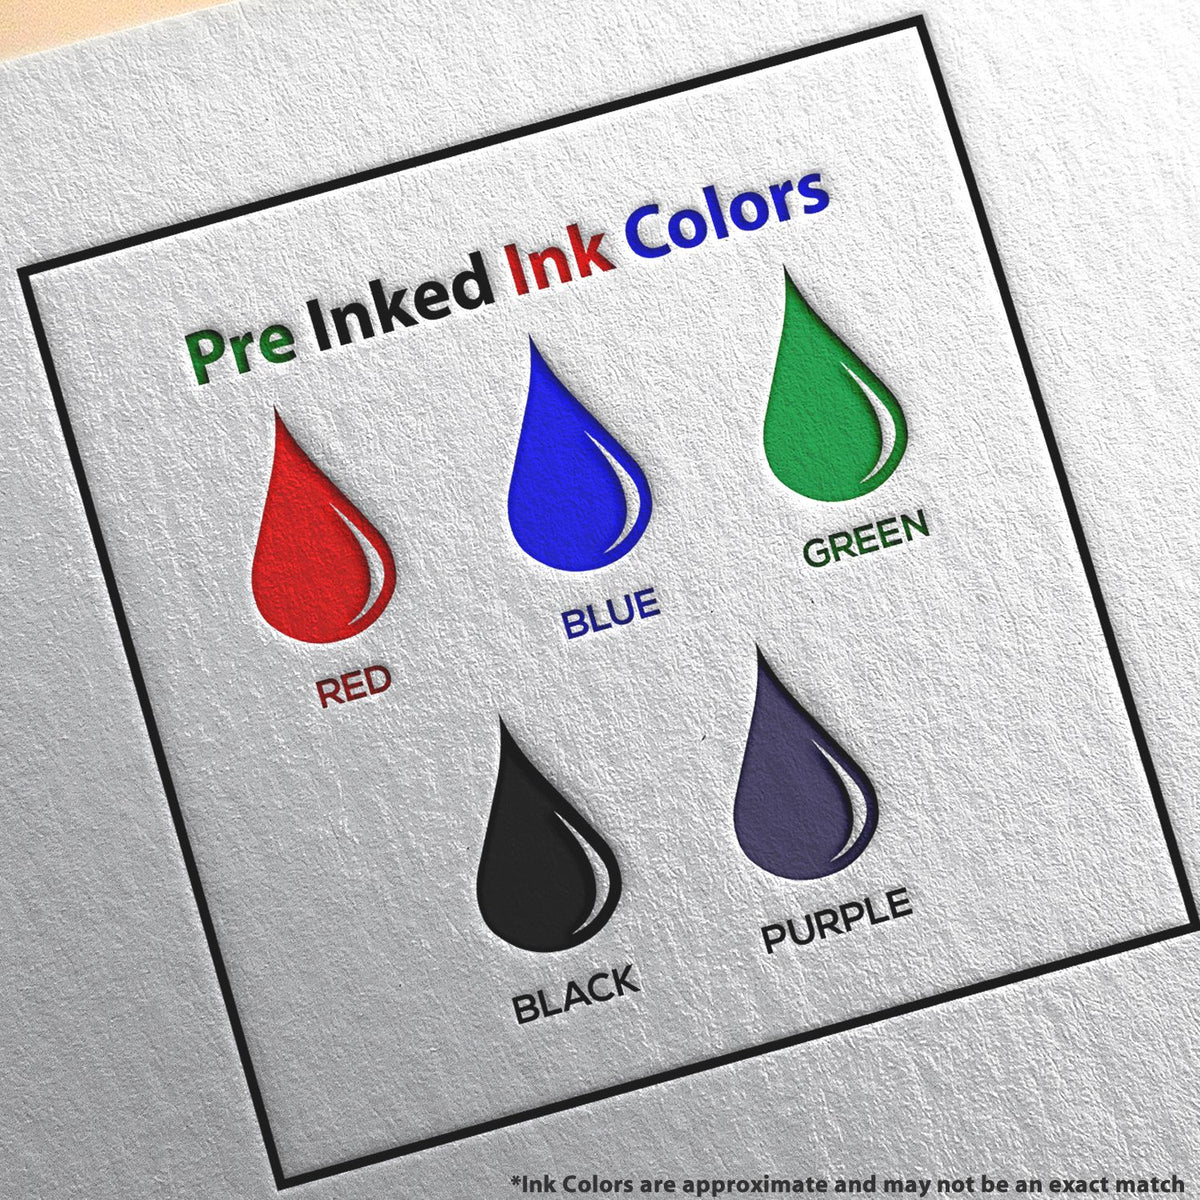 A picture showing the different ink colors or hues available for the Premium MaxLight Pre-Inked Guam Engineering Stamp product.